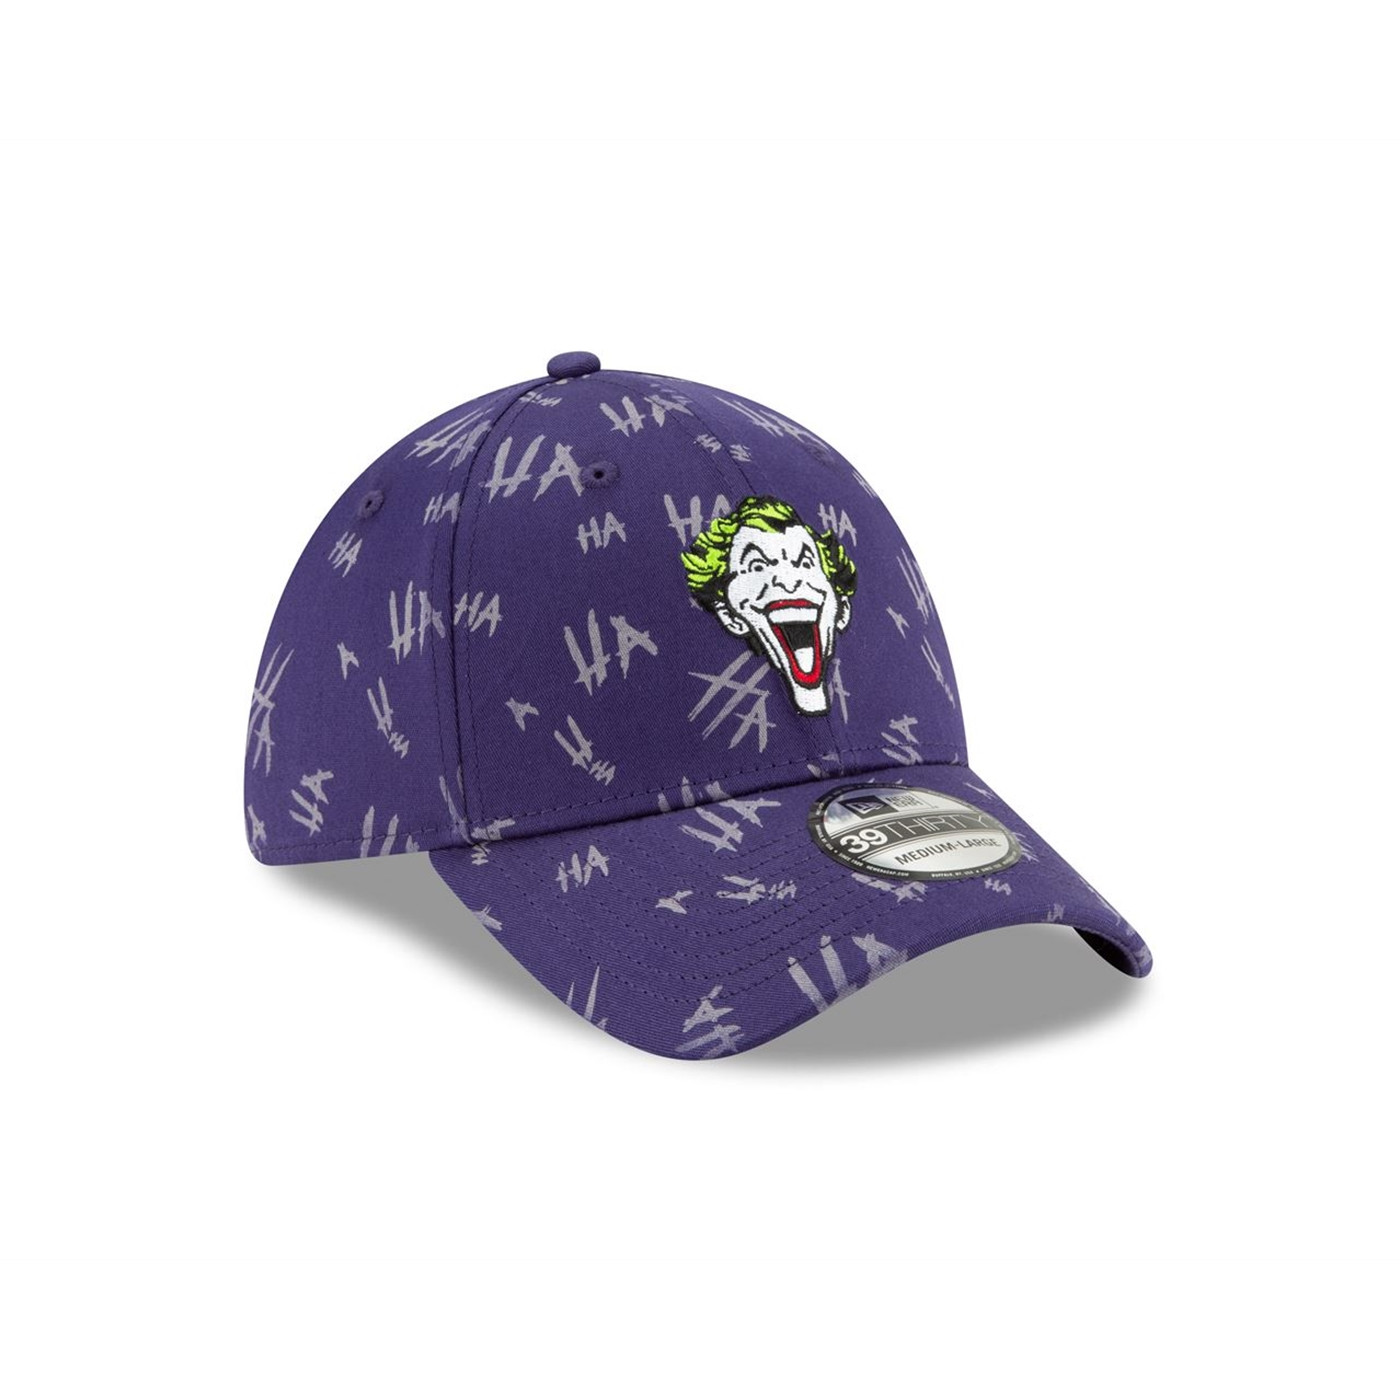 Joker Purple All Over HAHA 59Fifty Fitted New Era Hat Purple